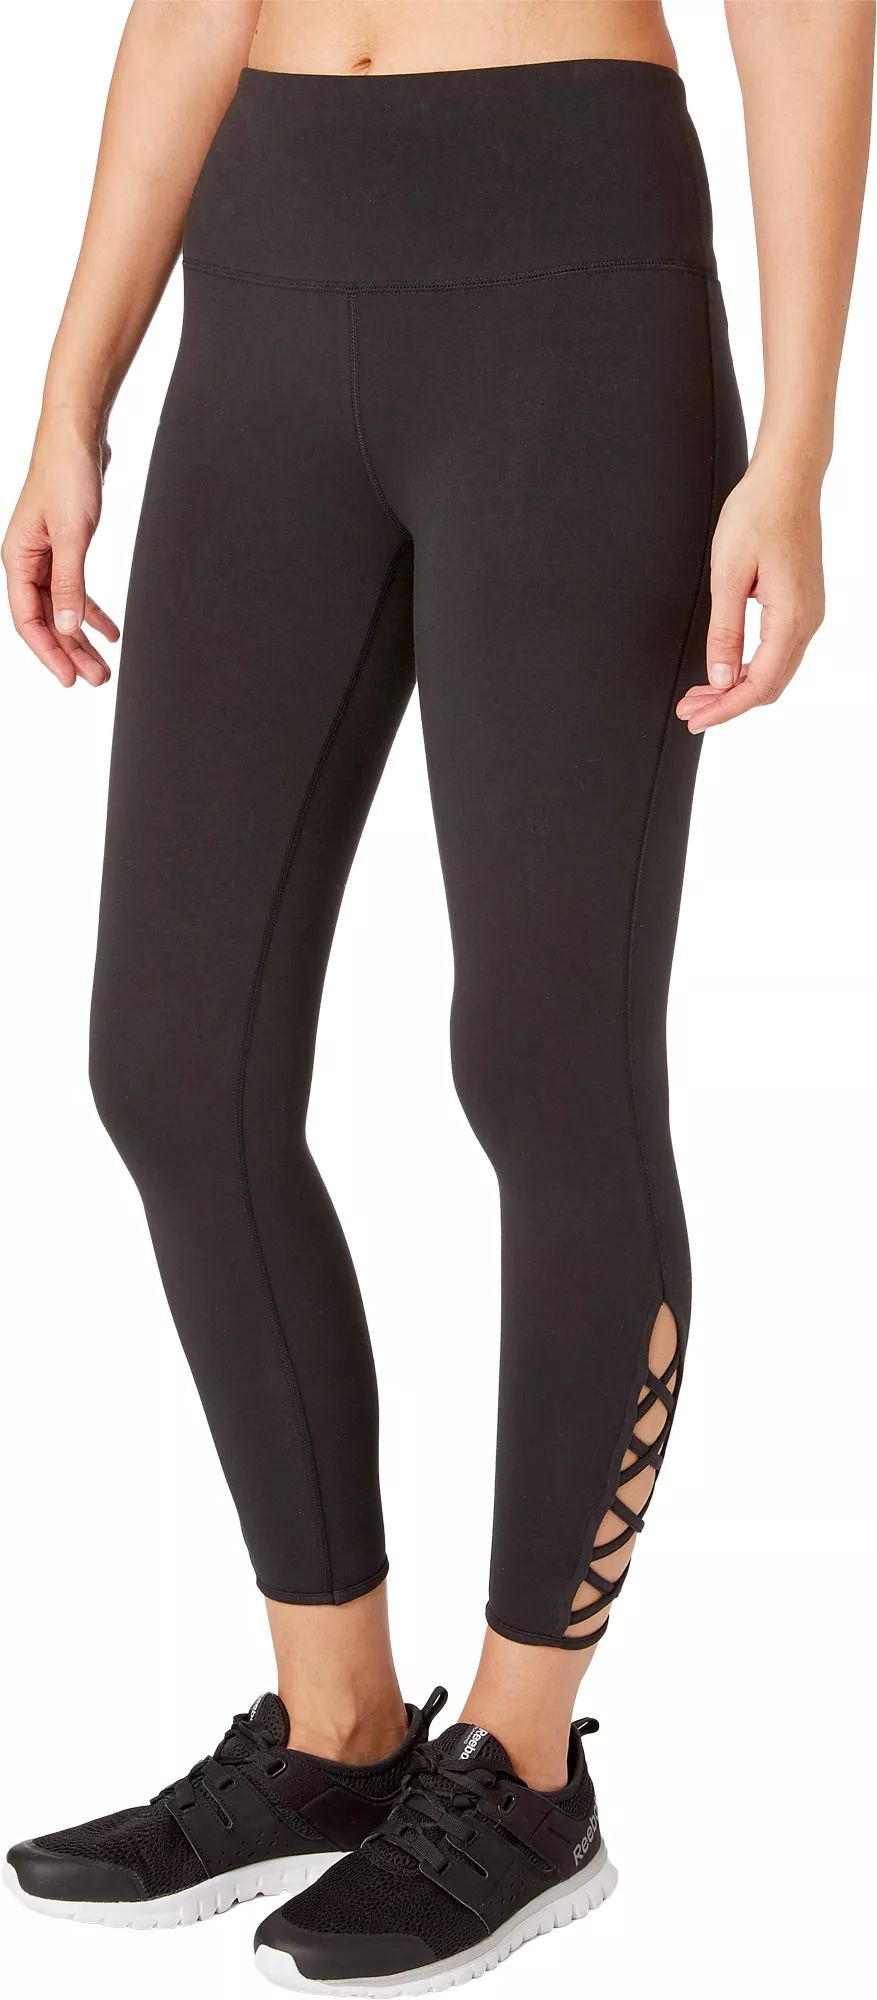 Reebok Women's Stretch Cotton Cross Ankle 7/8 Tights, Size: XS, Black | Dick's Sporting Goods